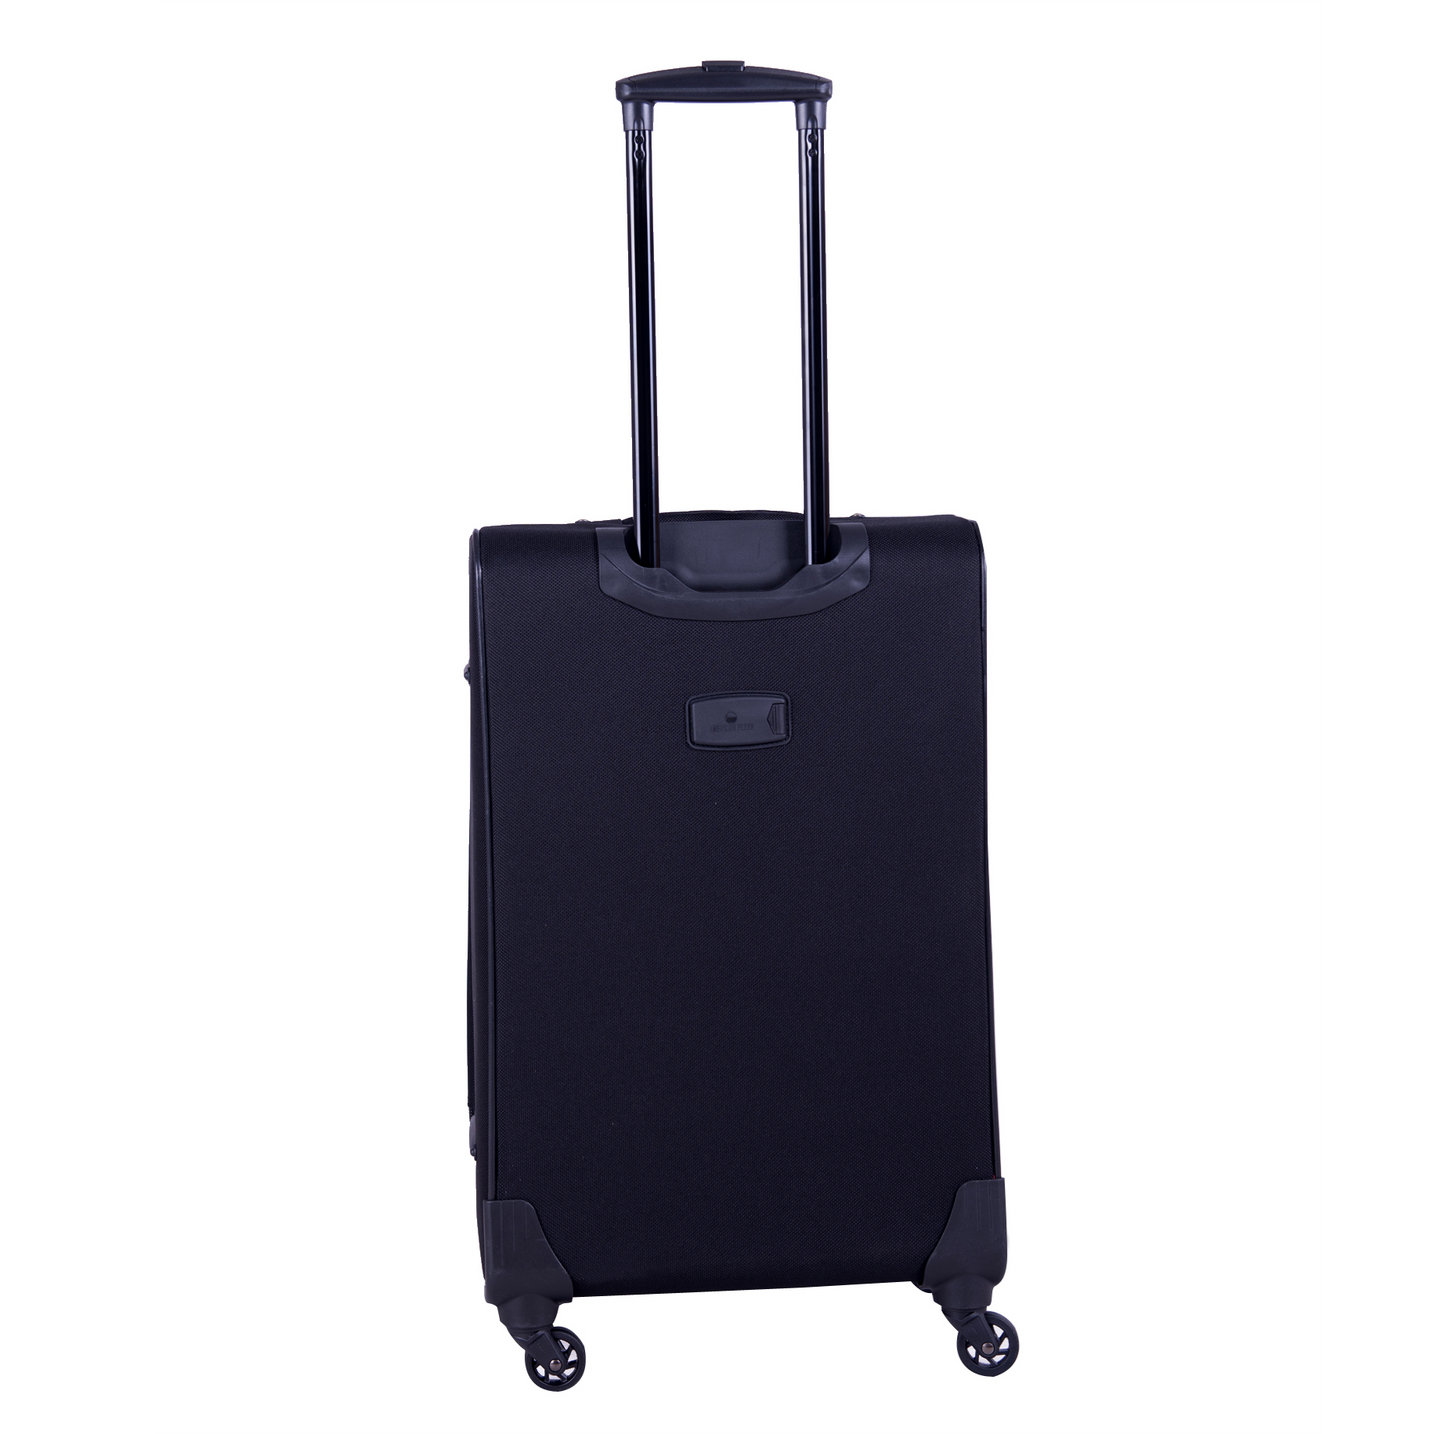 American Flyer South West 25" Spinner Luggage